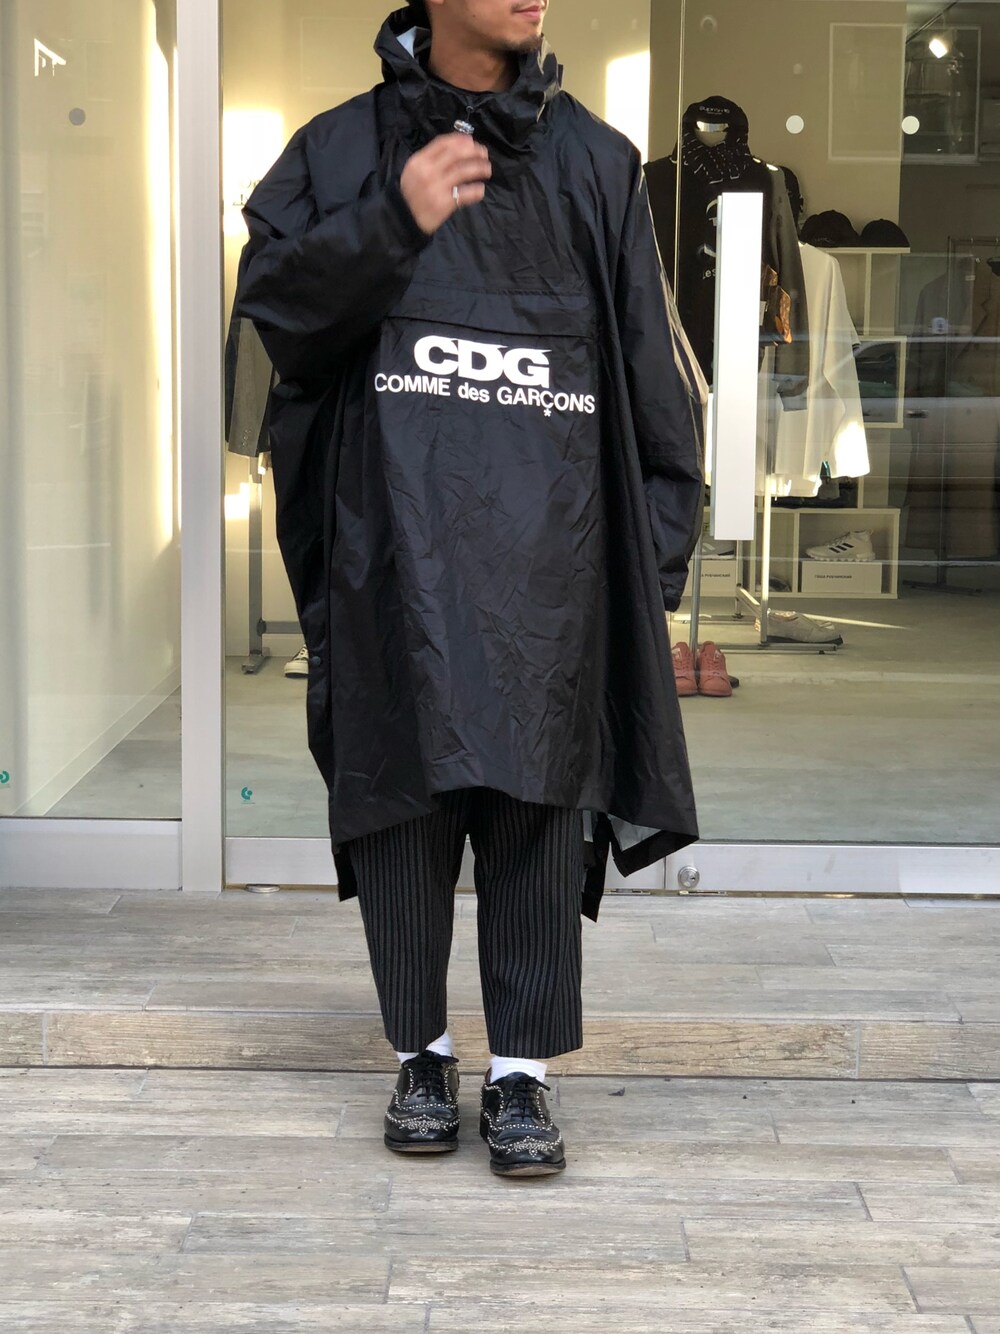 CDG COMME des GARCONS ビッグ ナイロン コート ポンチョ - ナイロン 